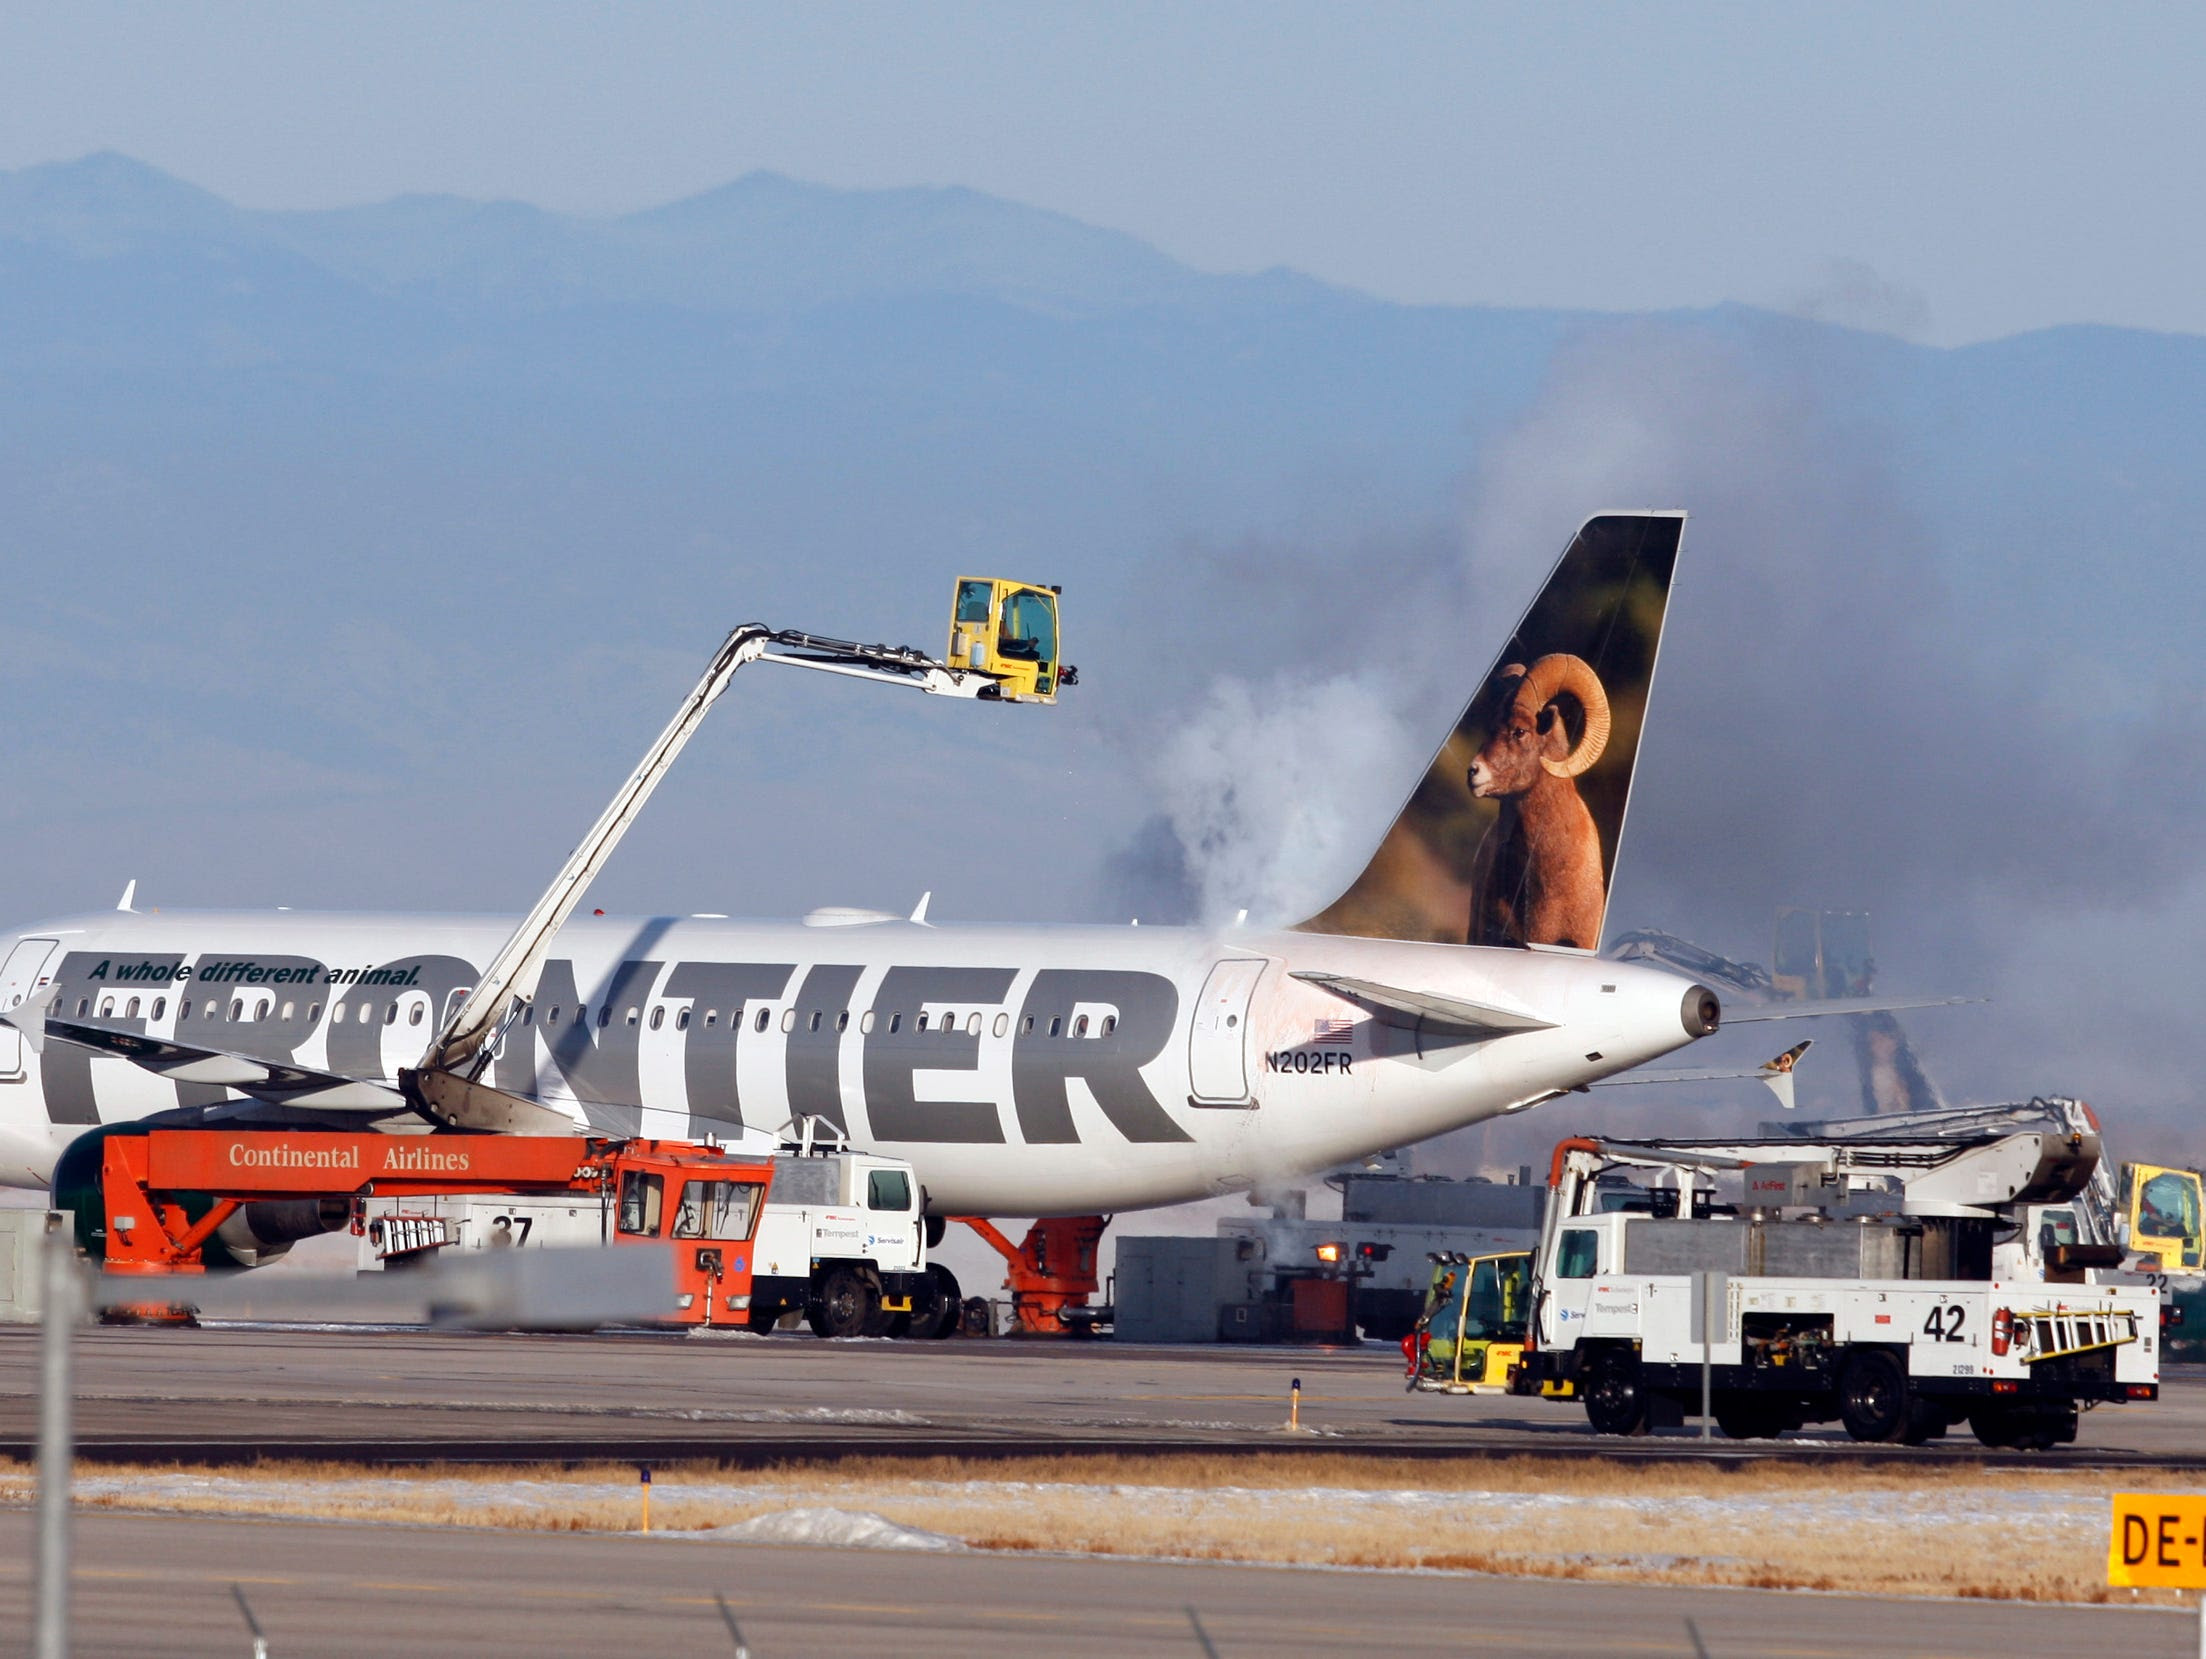 A Frontier Airlines jetliner is sprayed with de-icing fluid before taking off from Denver International Airport.